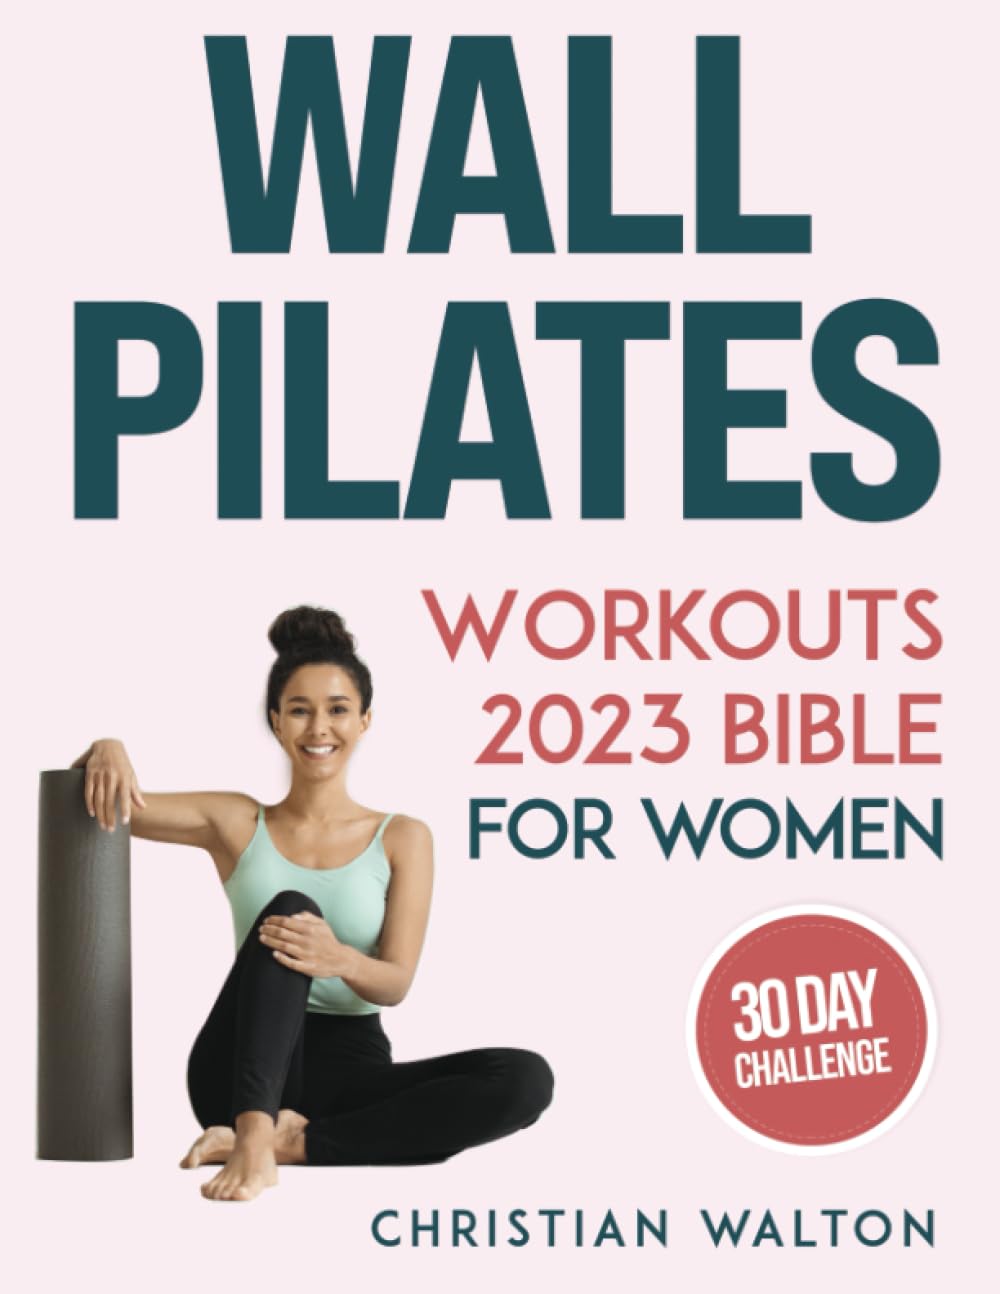 Wall Pilates Workouts Bible for Women: The Complete 30-Day Body Sculpting Challenge to Tone Your Glutes, Abs & Back with Illustrated Full-Body Exercise Routines | Flexibility, Strength and Balance